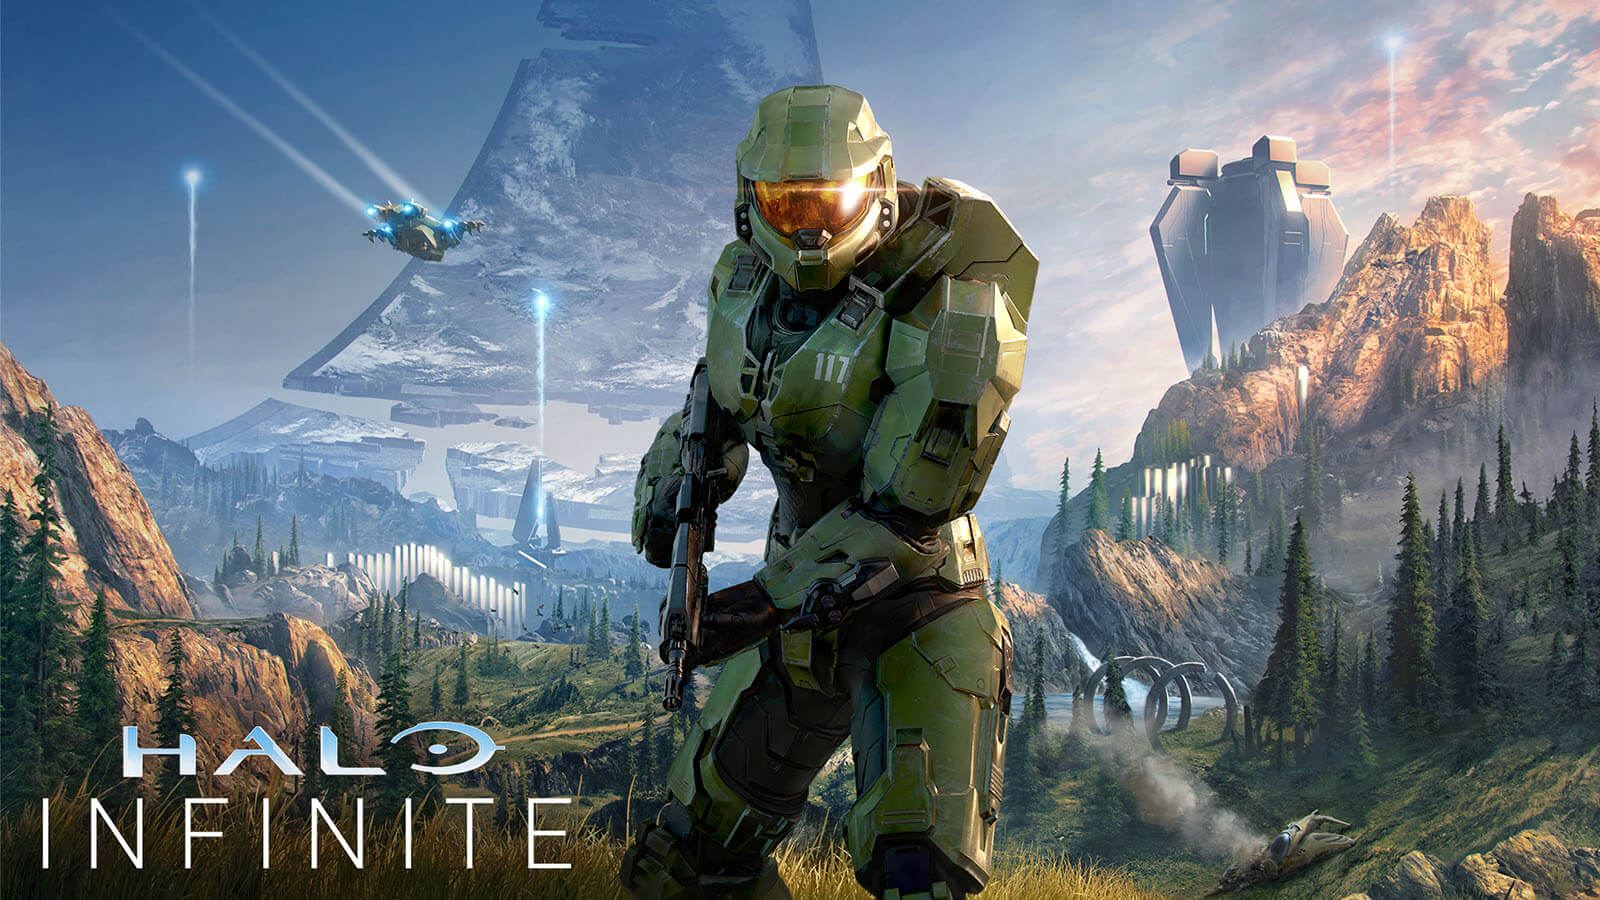 Halo main character Master Chief in signature green armor featuring the number 117 on his left chest plate in white, centered in front of a large grey triangular space ship with the words ‘Halo Infinite’ stylized in the bottom left corner.